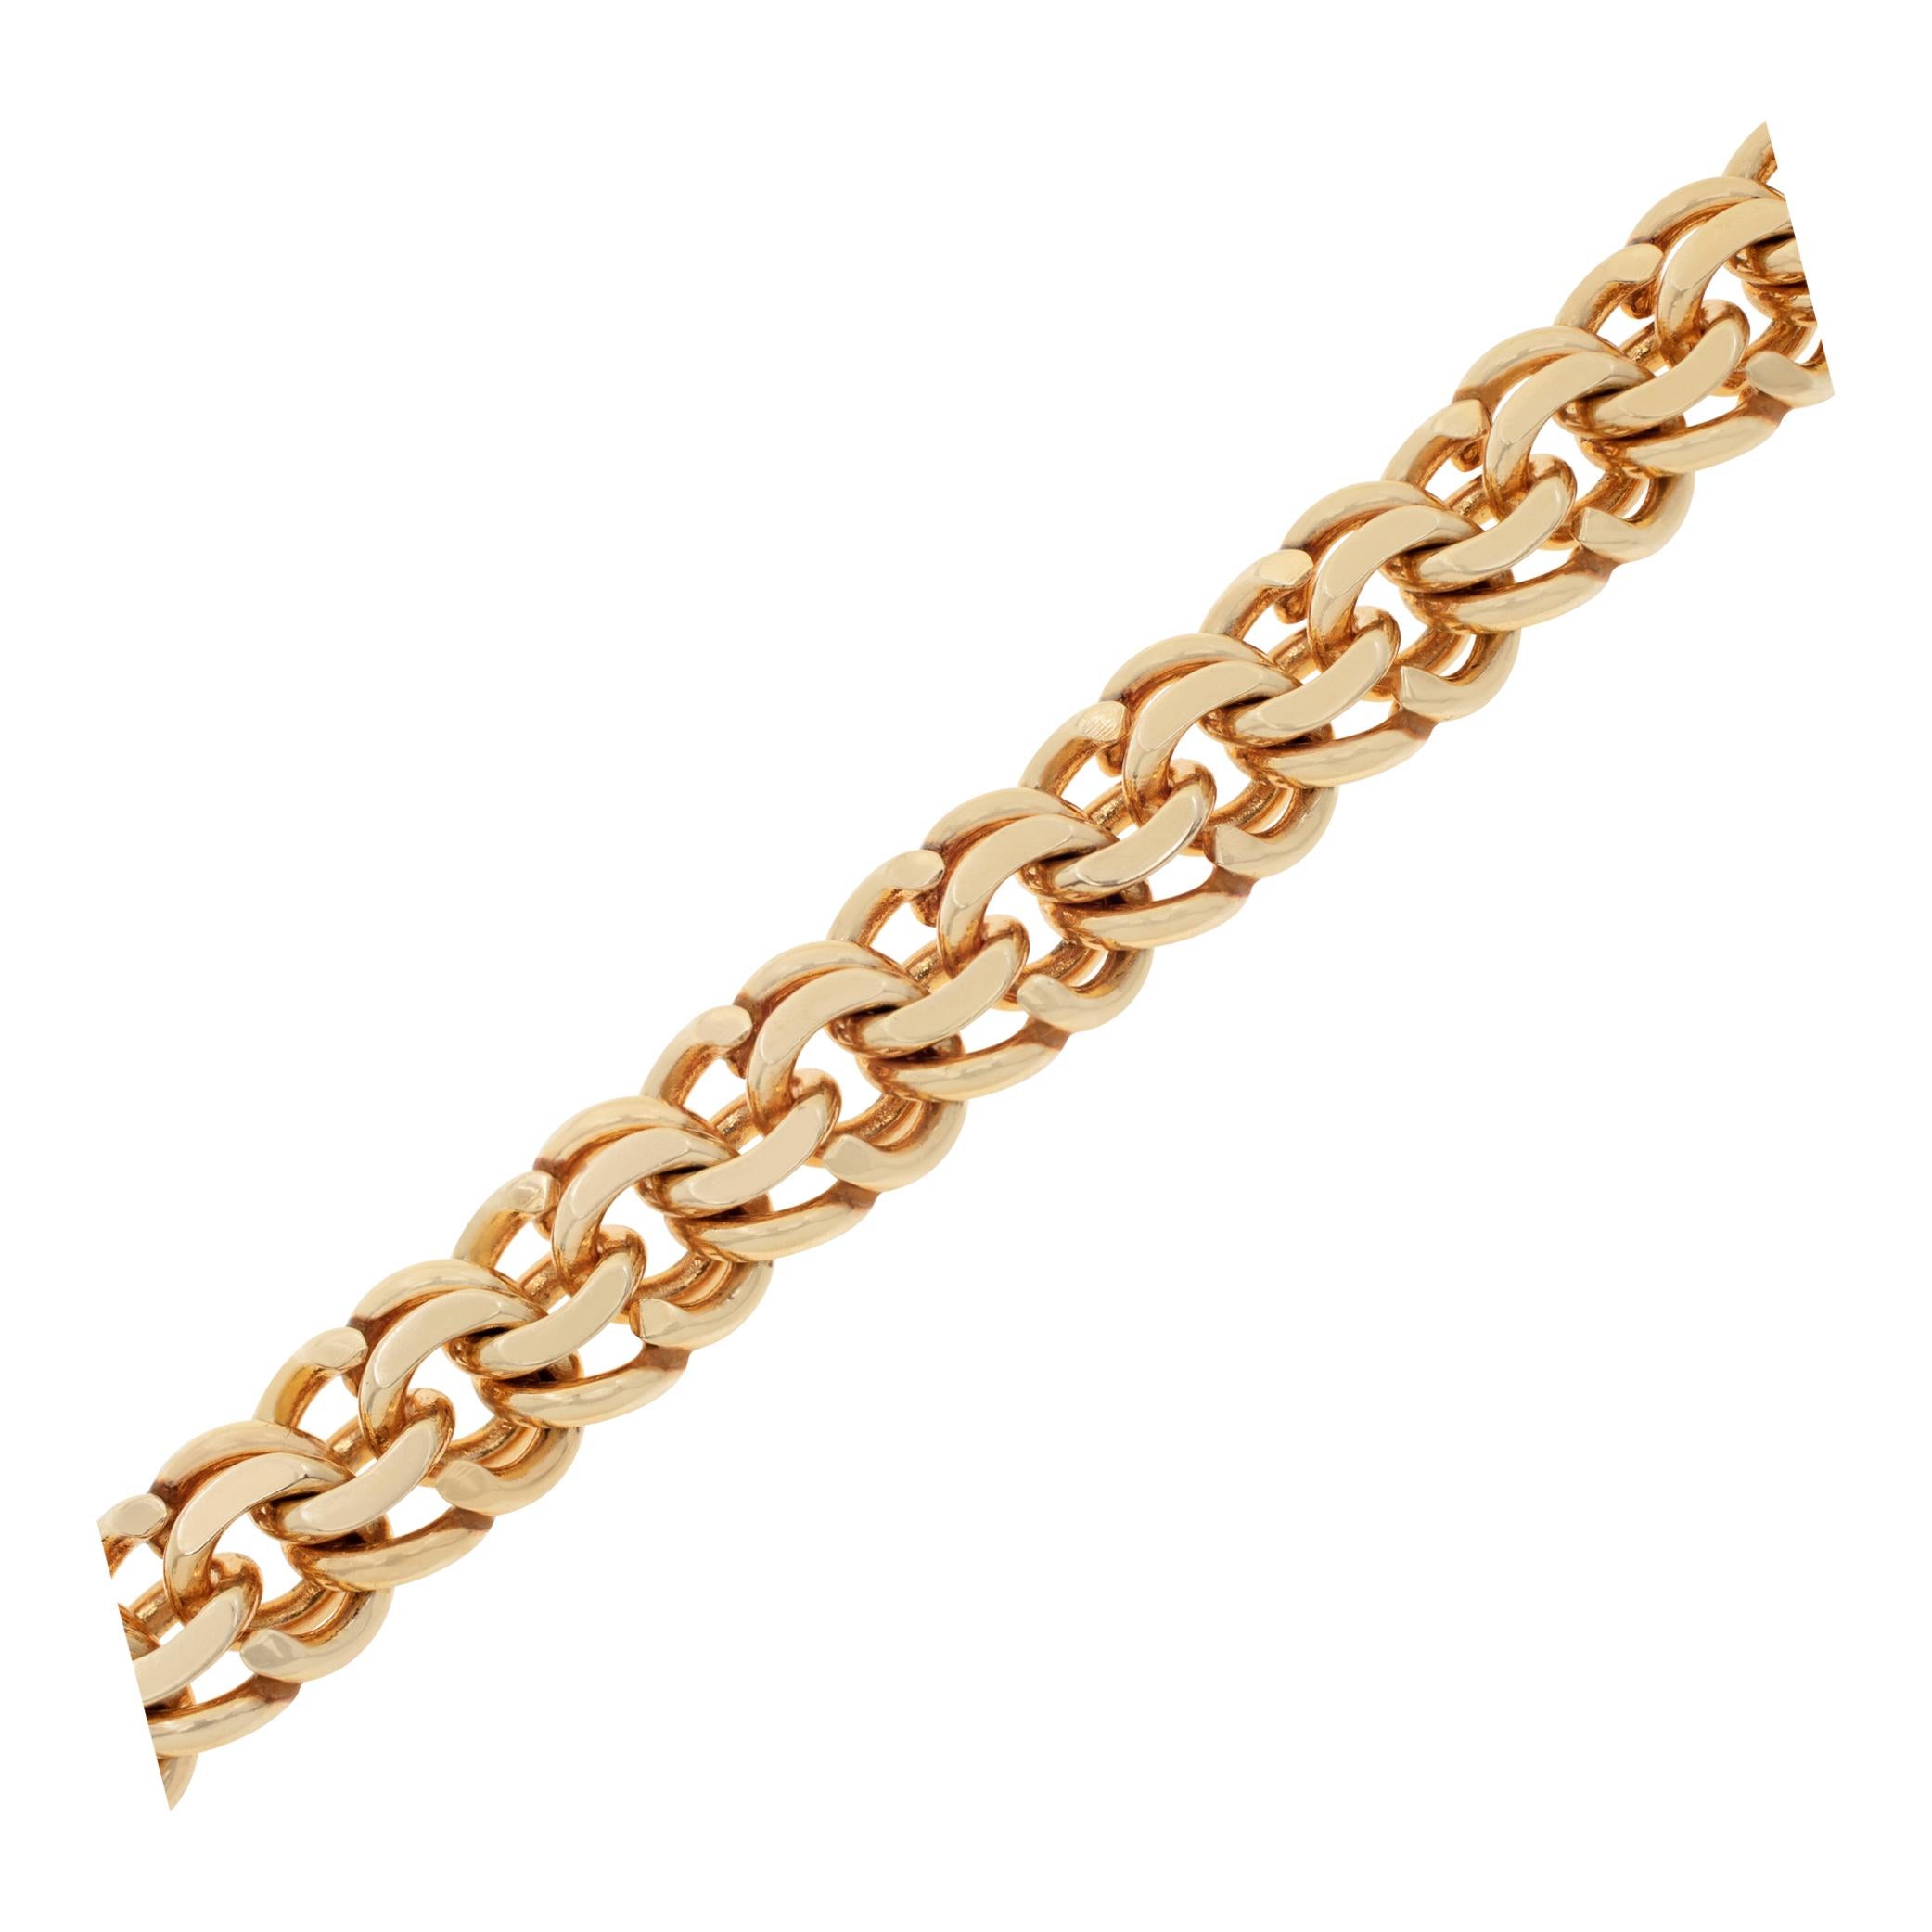 Unisex 14k rose gold intricate chain bracelet for wrists up to 7.5 inches; width 9mm. Engraved with name 